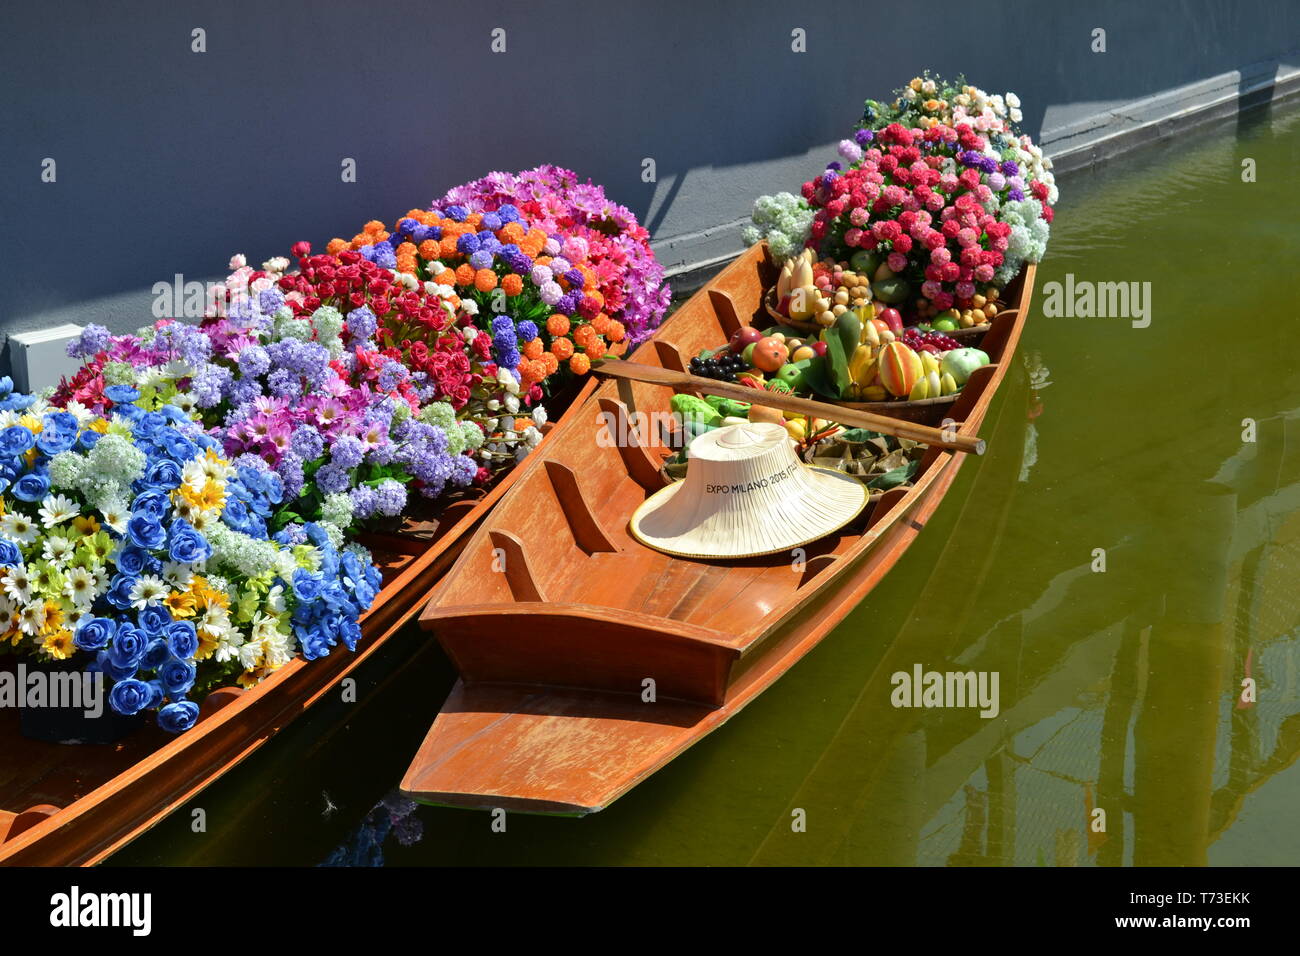 Milan/Italy - June 30, 2015: Two Thai wooden traditional boats for floating market filled with flowers anchored at Thailand Milano EXPO 2015 pavilion. Stock Photo